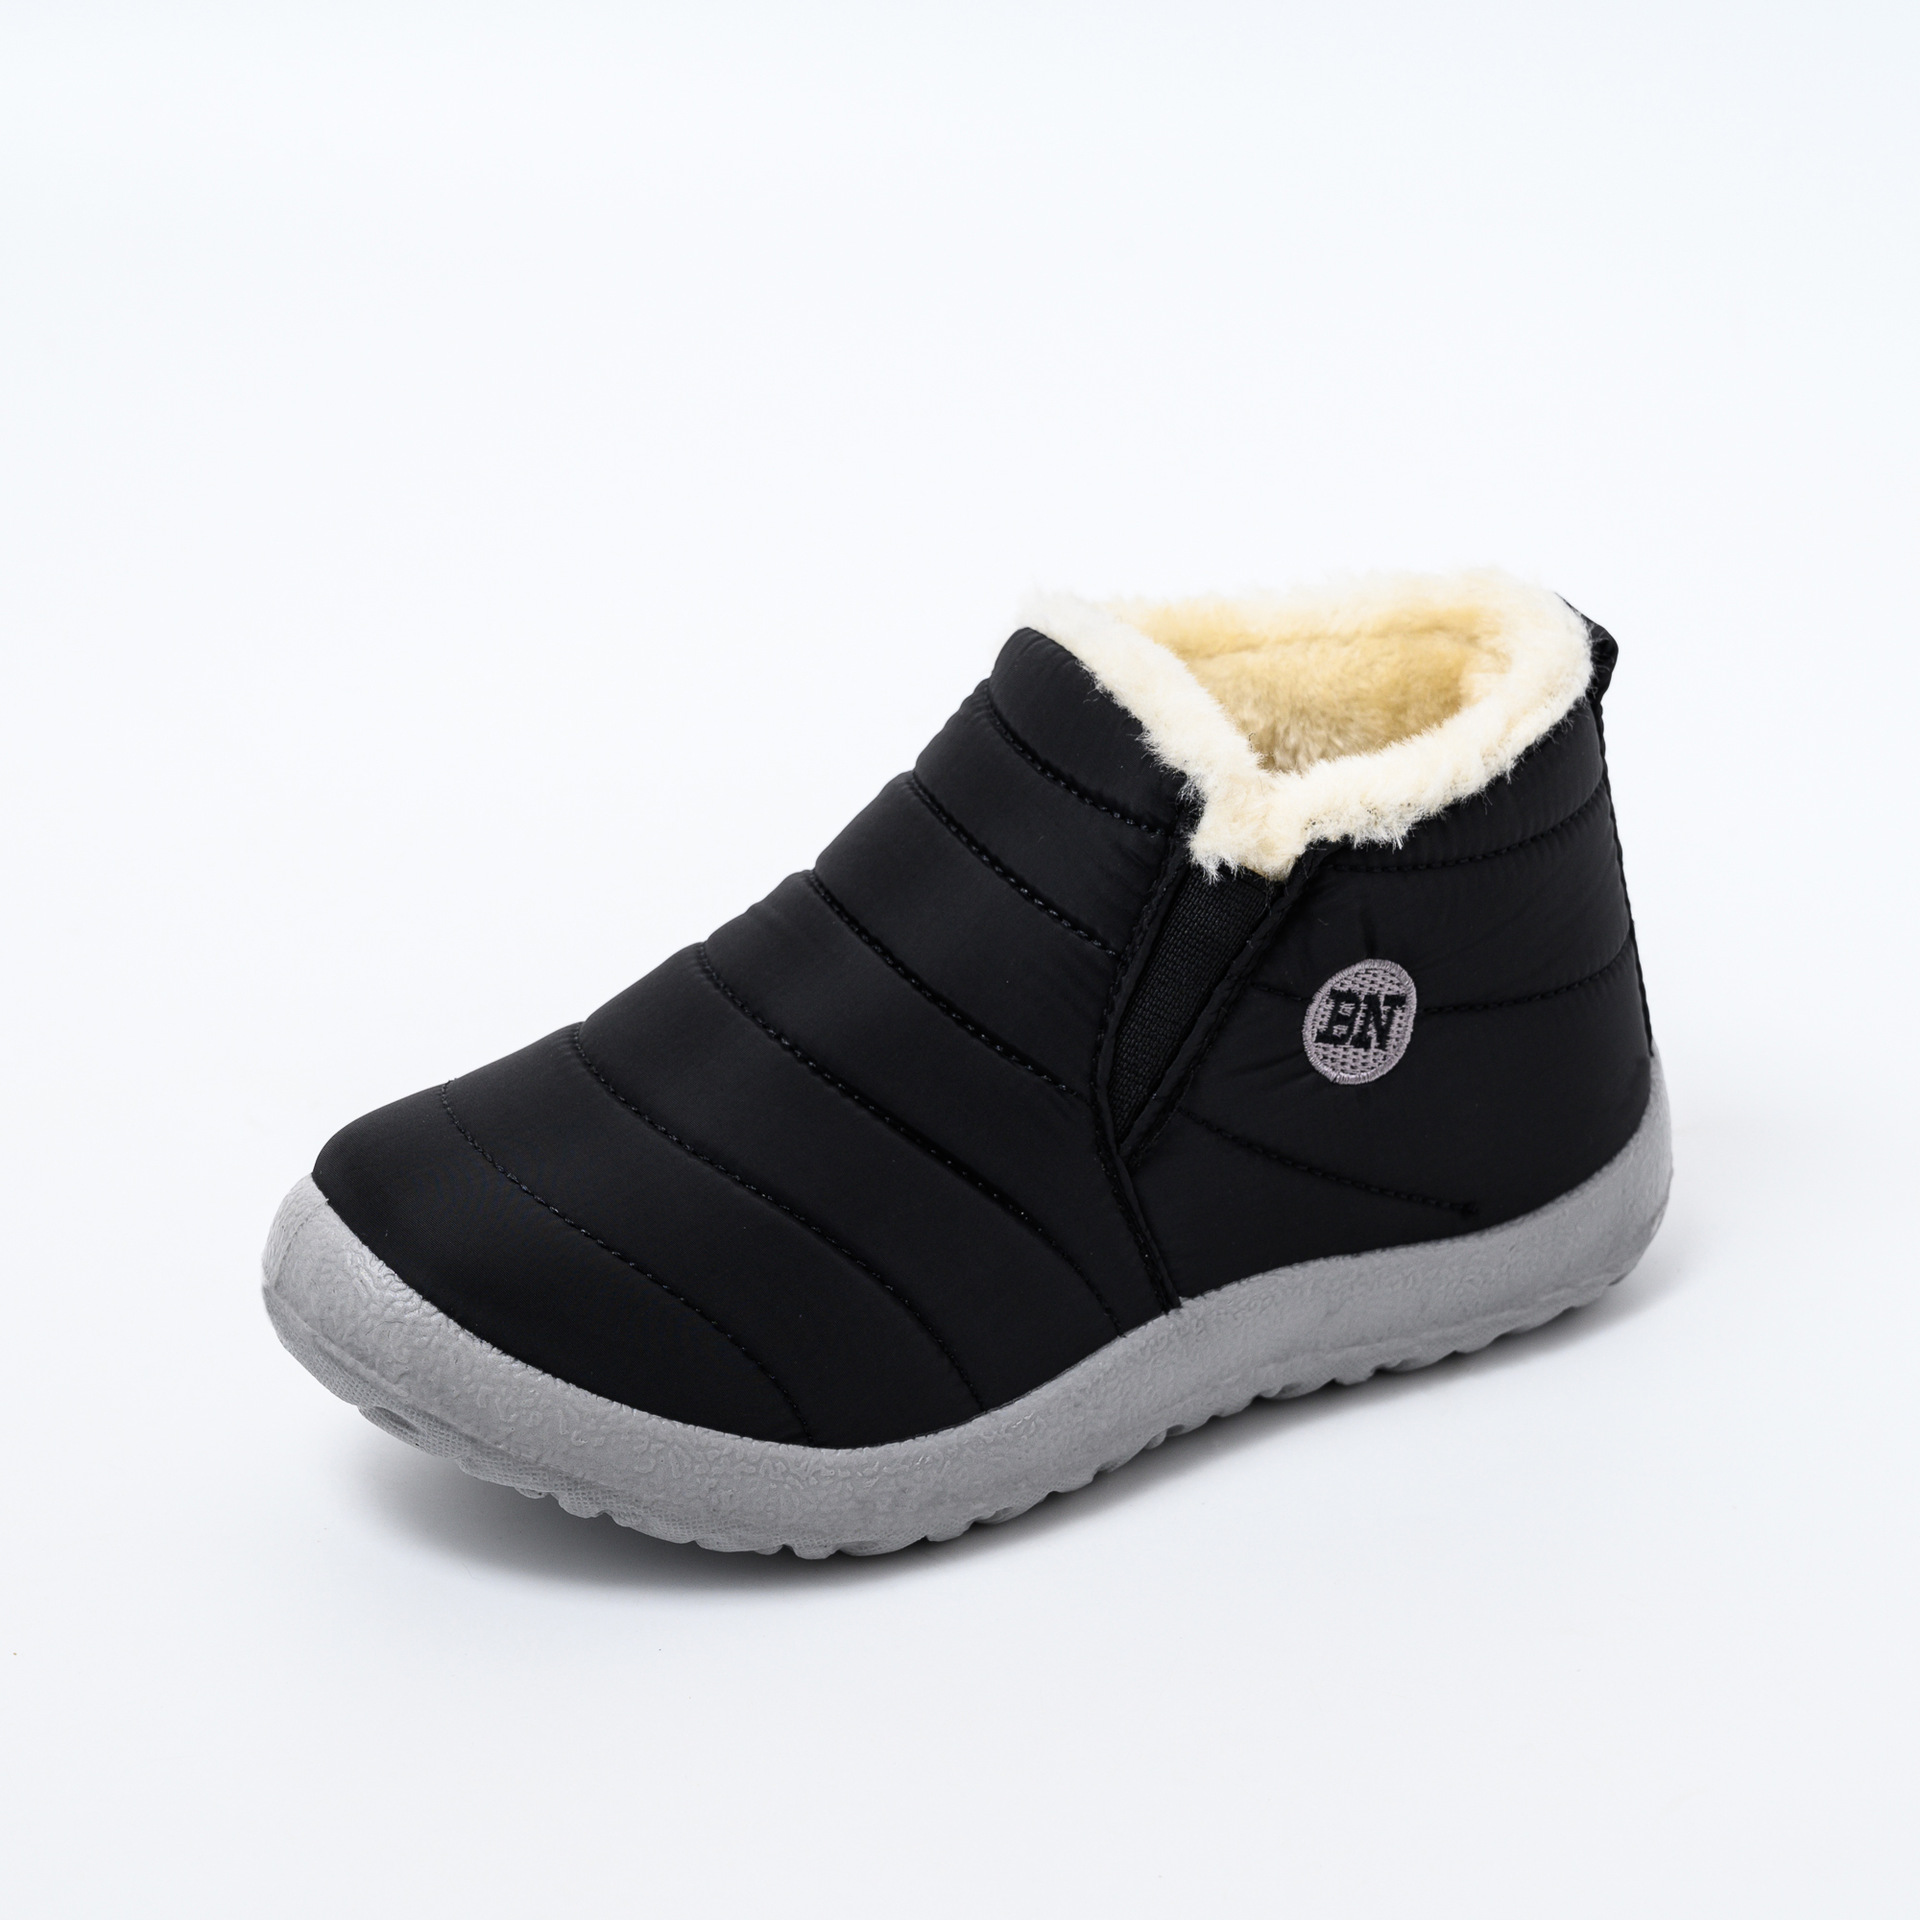 Higolot™ Winter Waterproof Snow Ankle Boots